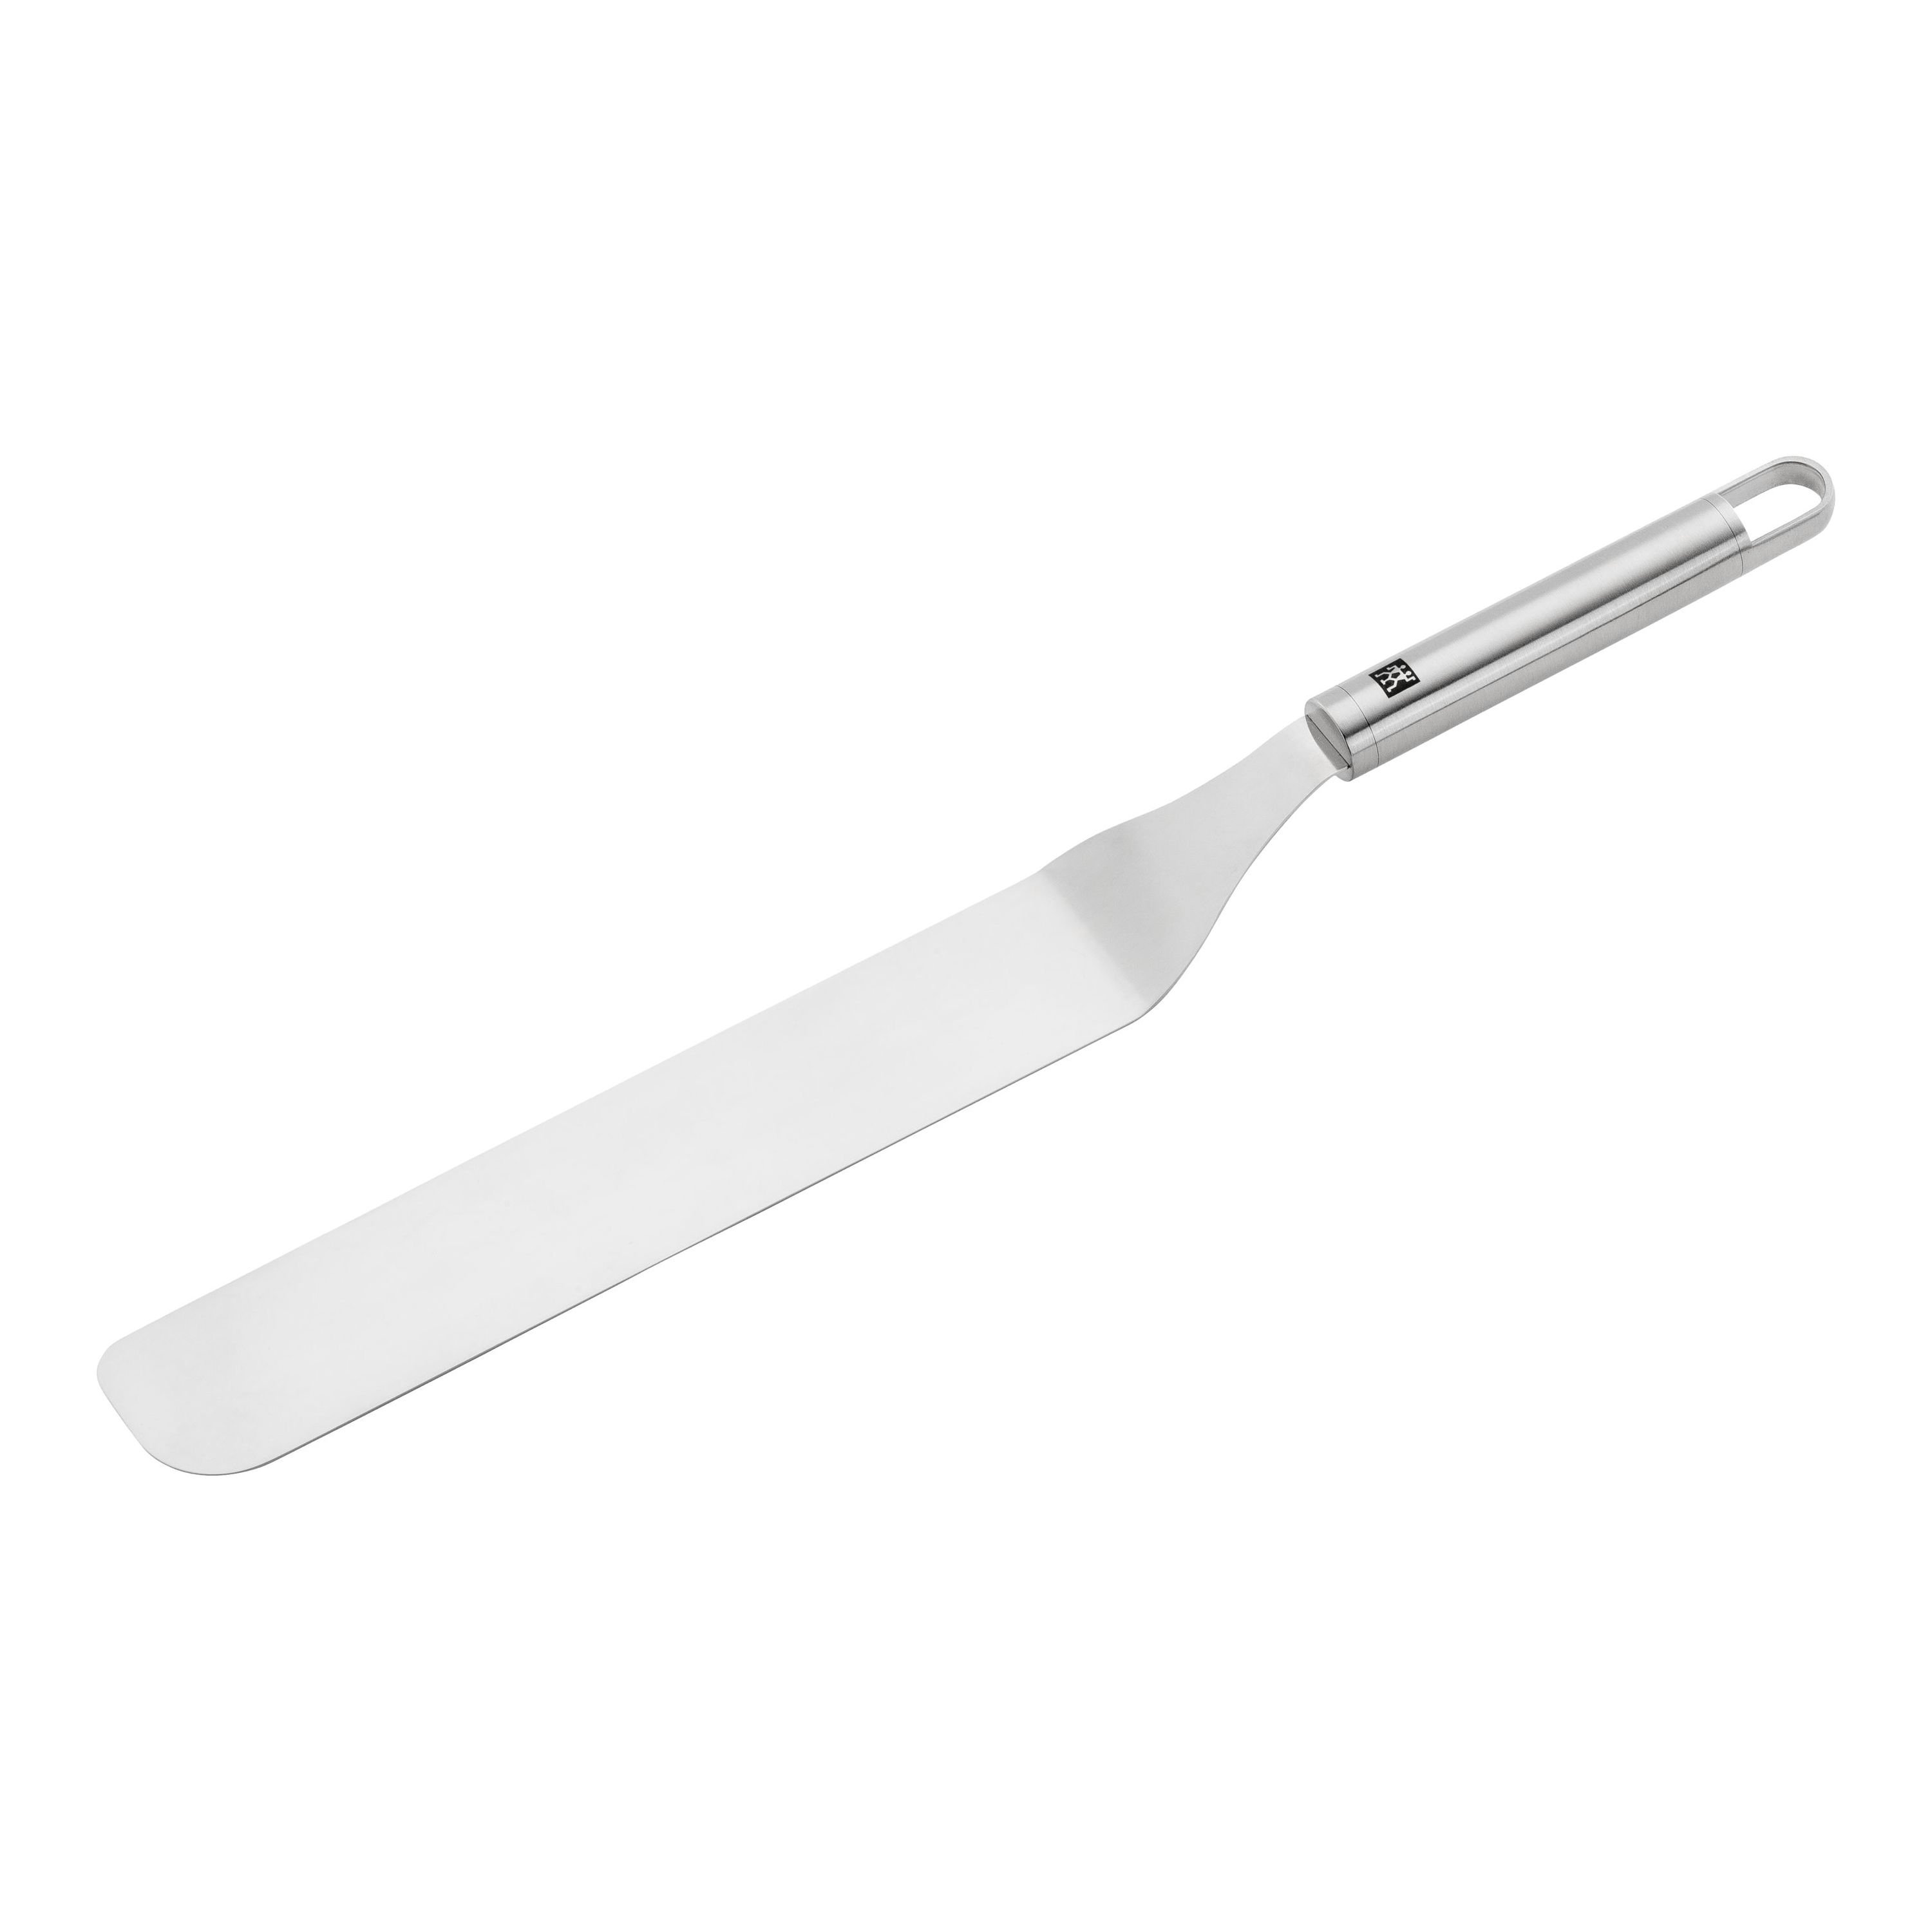 Met Lux Offset Spatula - Black, Stainless Steel - 10 inch Blade, Baking and Icing, Plastic Handle - 14 3/4 inch - 1 Count Box